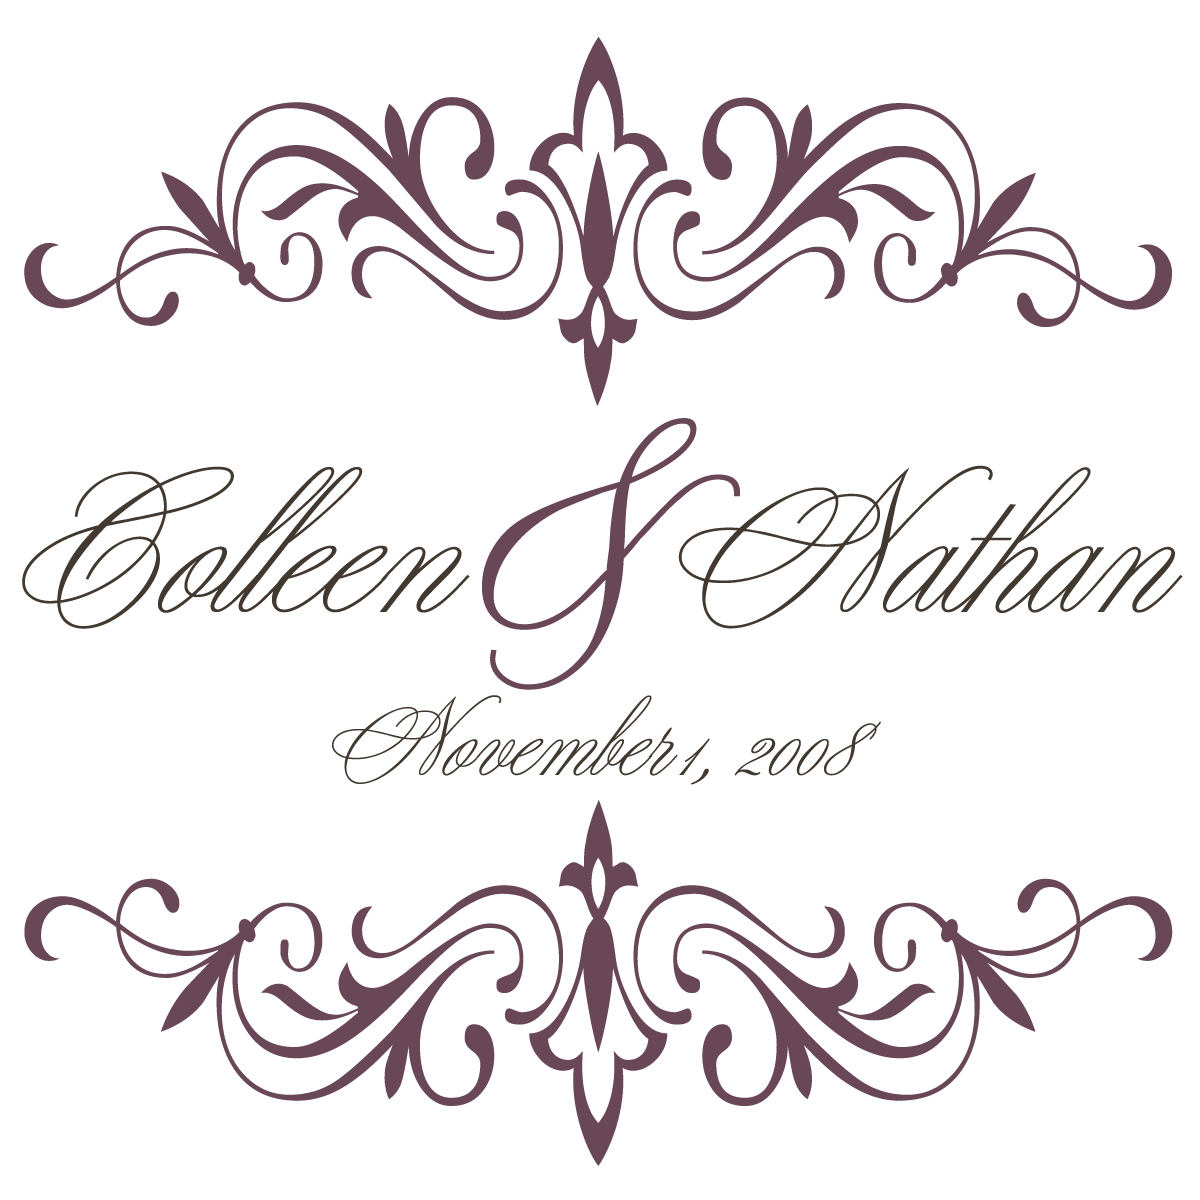 [Colleen_&_Nathan_1a_revised_-_2_copy.jpg]